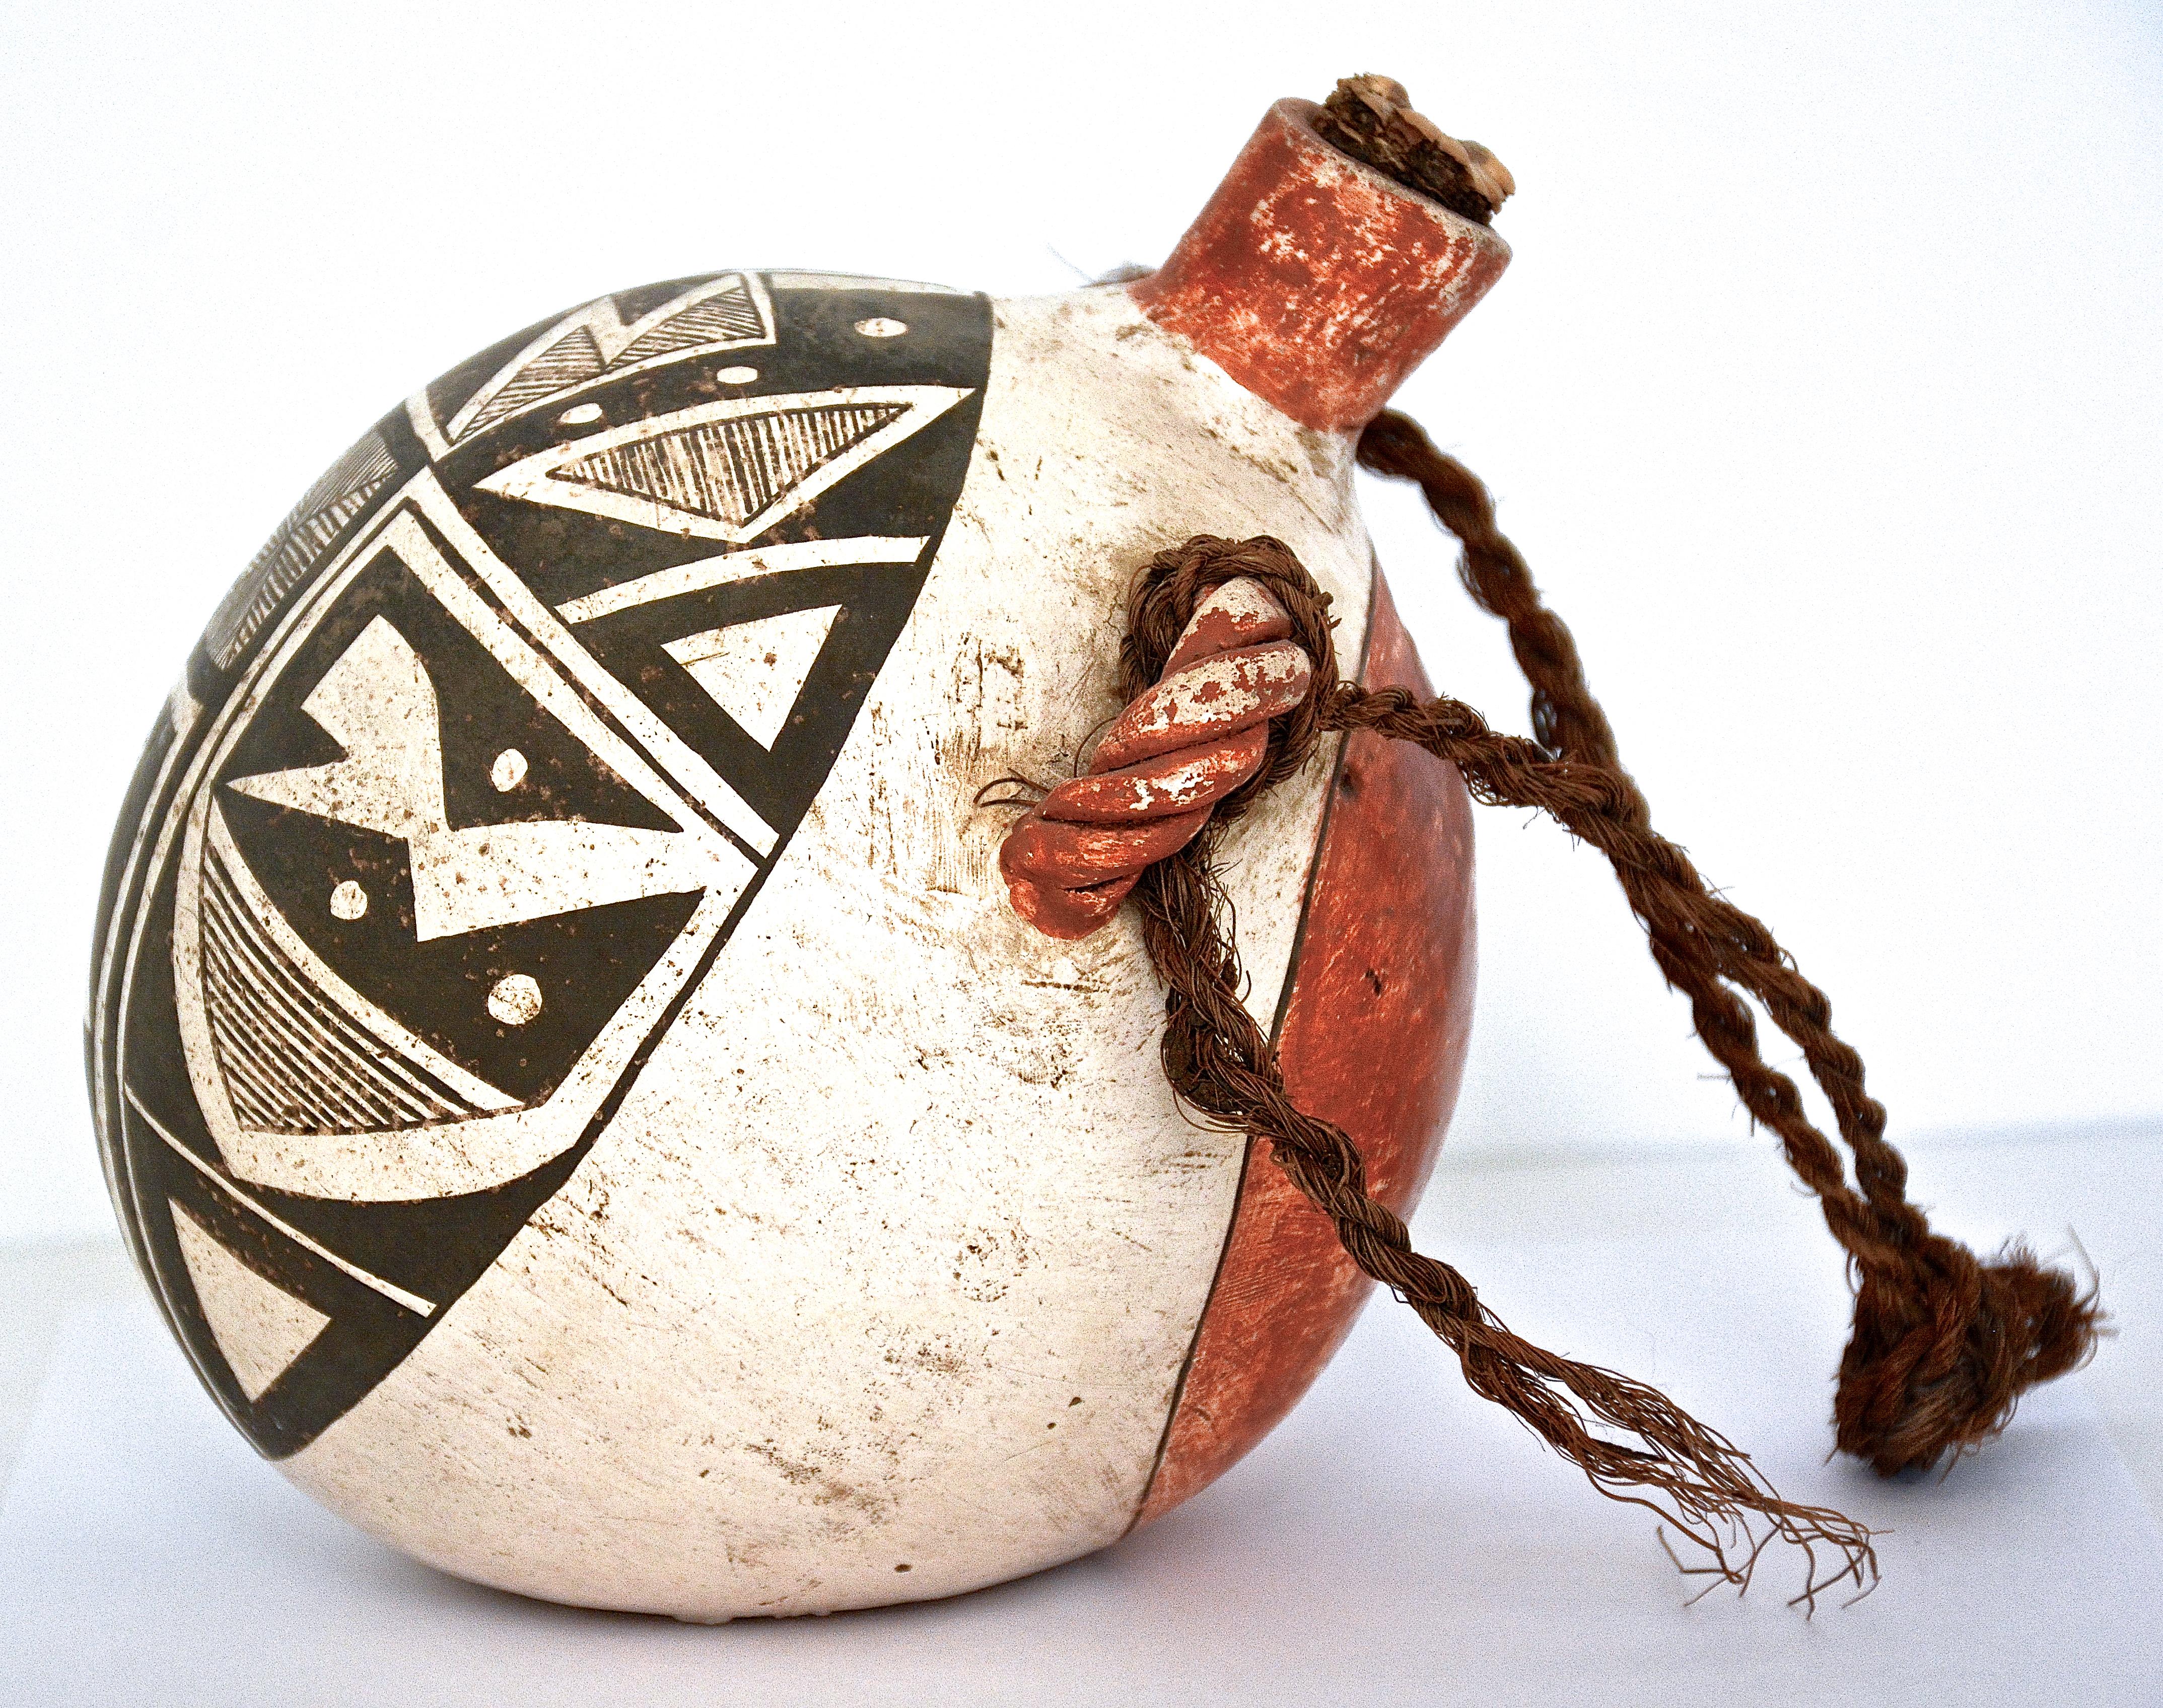 Pottery Canteen
Acoma
1900
6 inches Height x 5.50 inches Diameter.
Clay, mineral pigments, twined fiber cordage, corn cob. 

A wonderful example of an antique polychrome Acoma Pueblo Globular Pottery Canteen circa 1900, with geometric designs. 

In